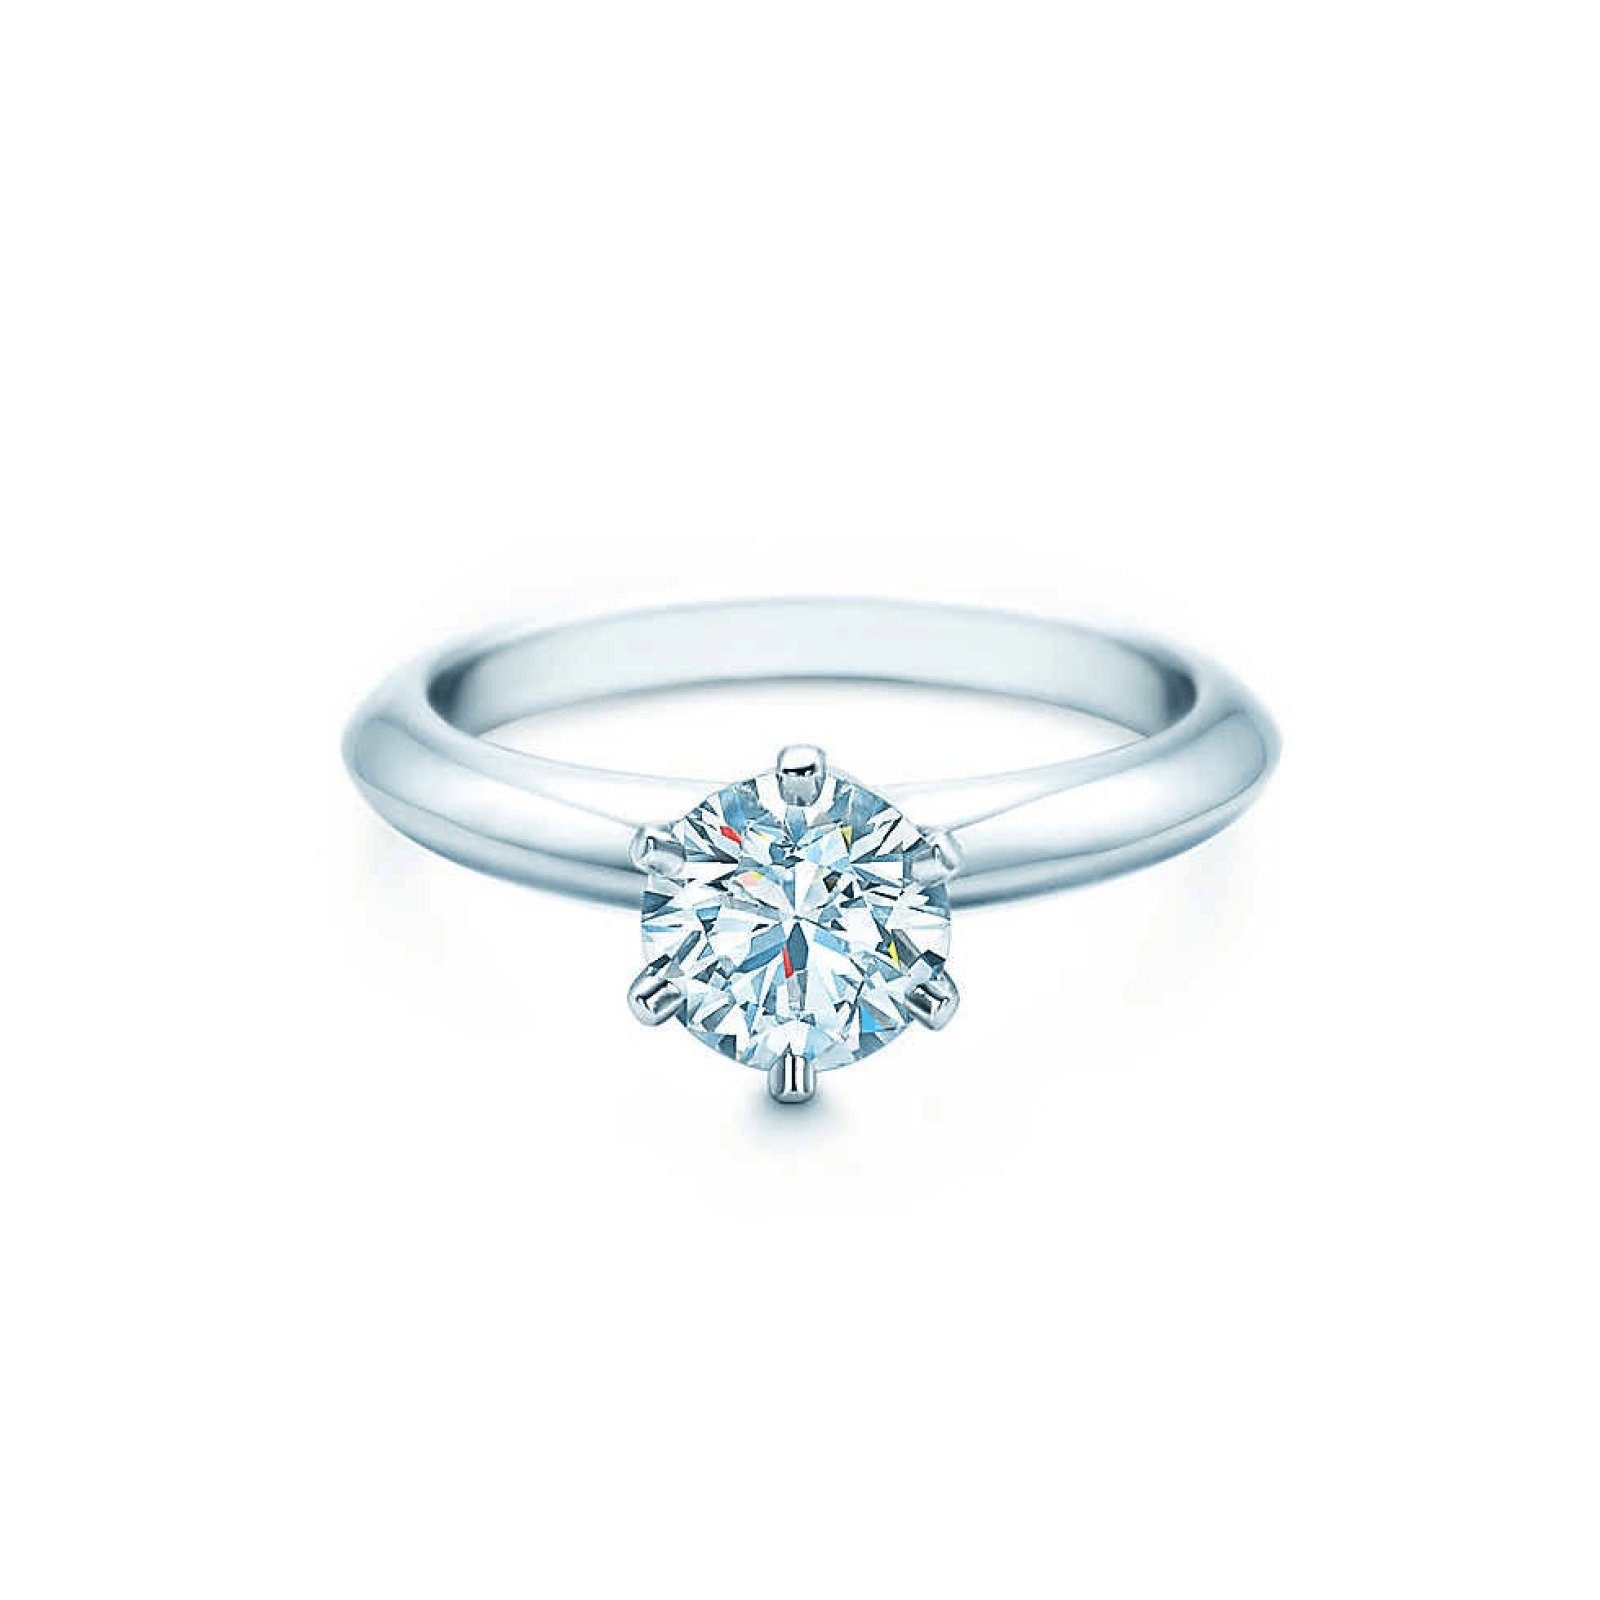  Tiffany  Co  Solitaire 0 70ct Round Diamond Engagement 